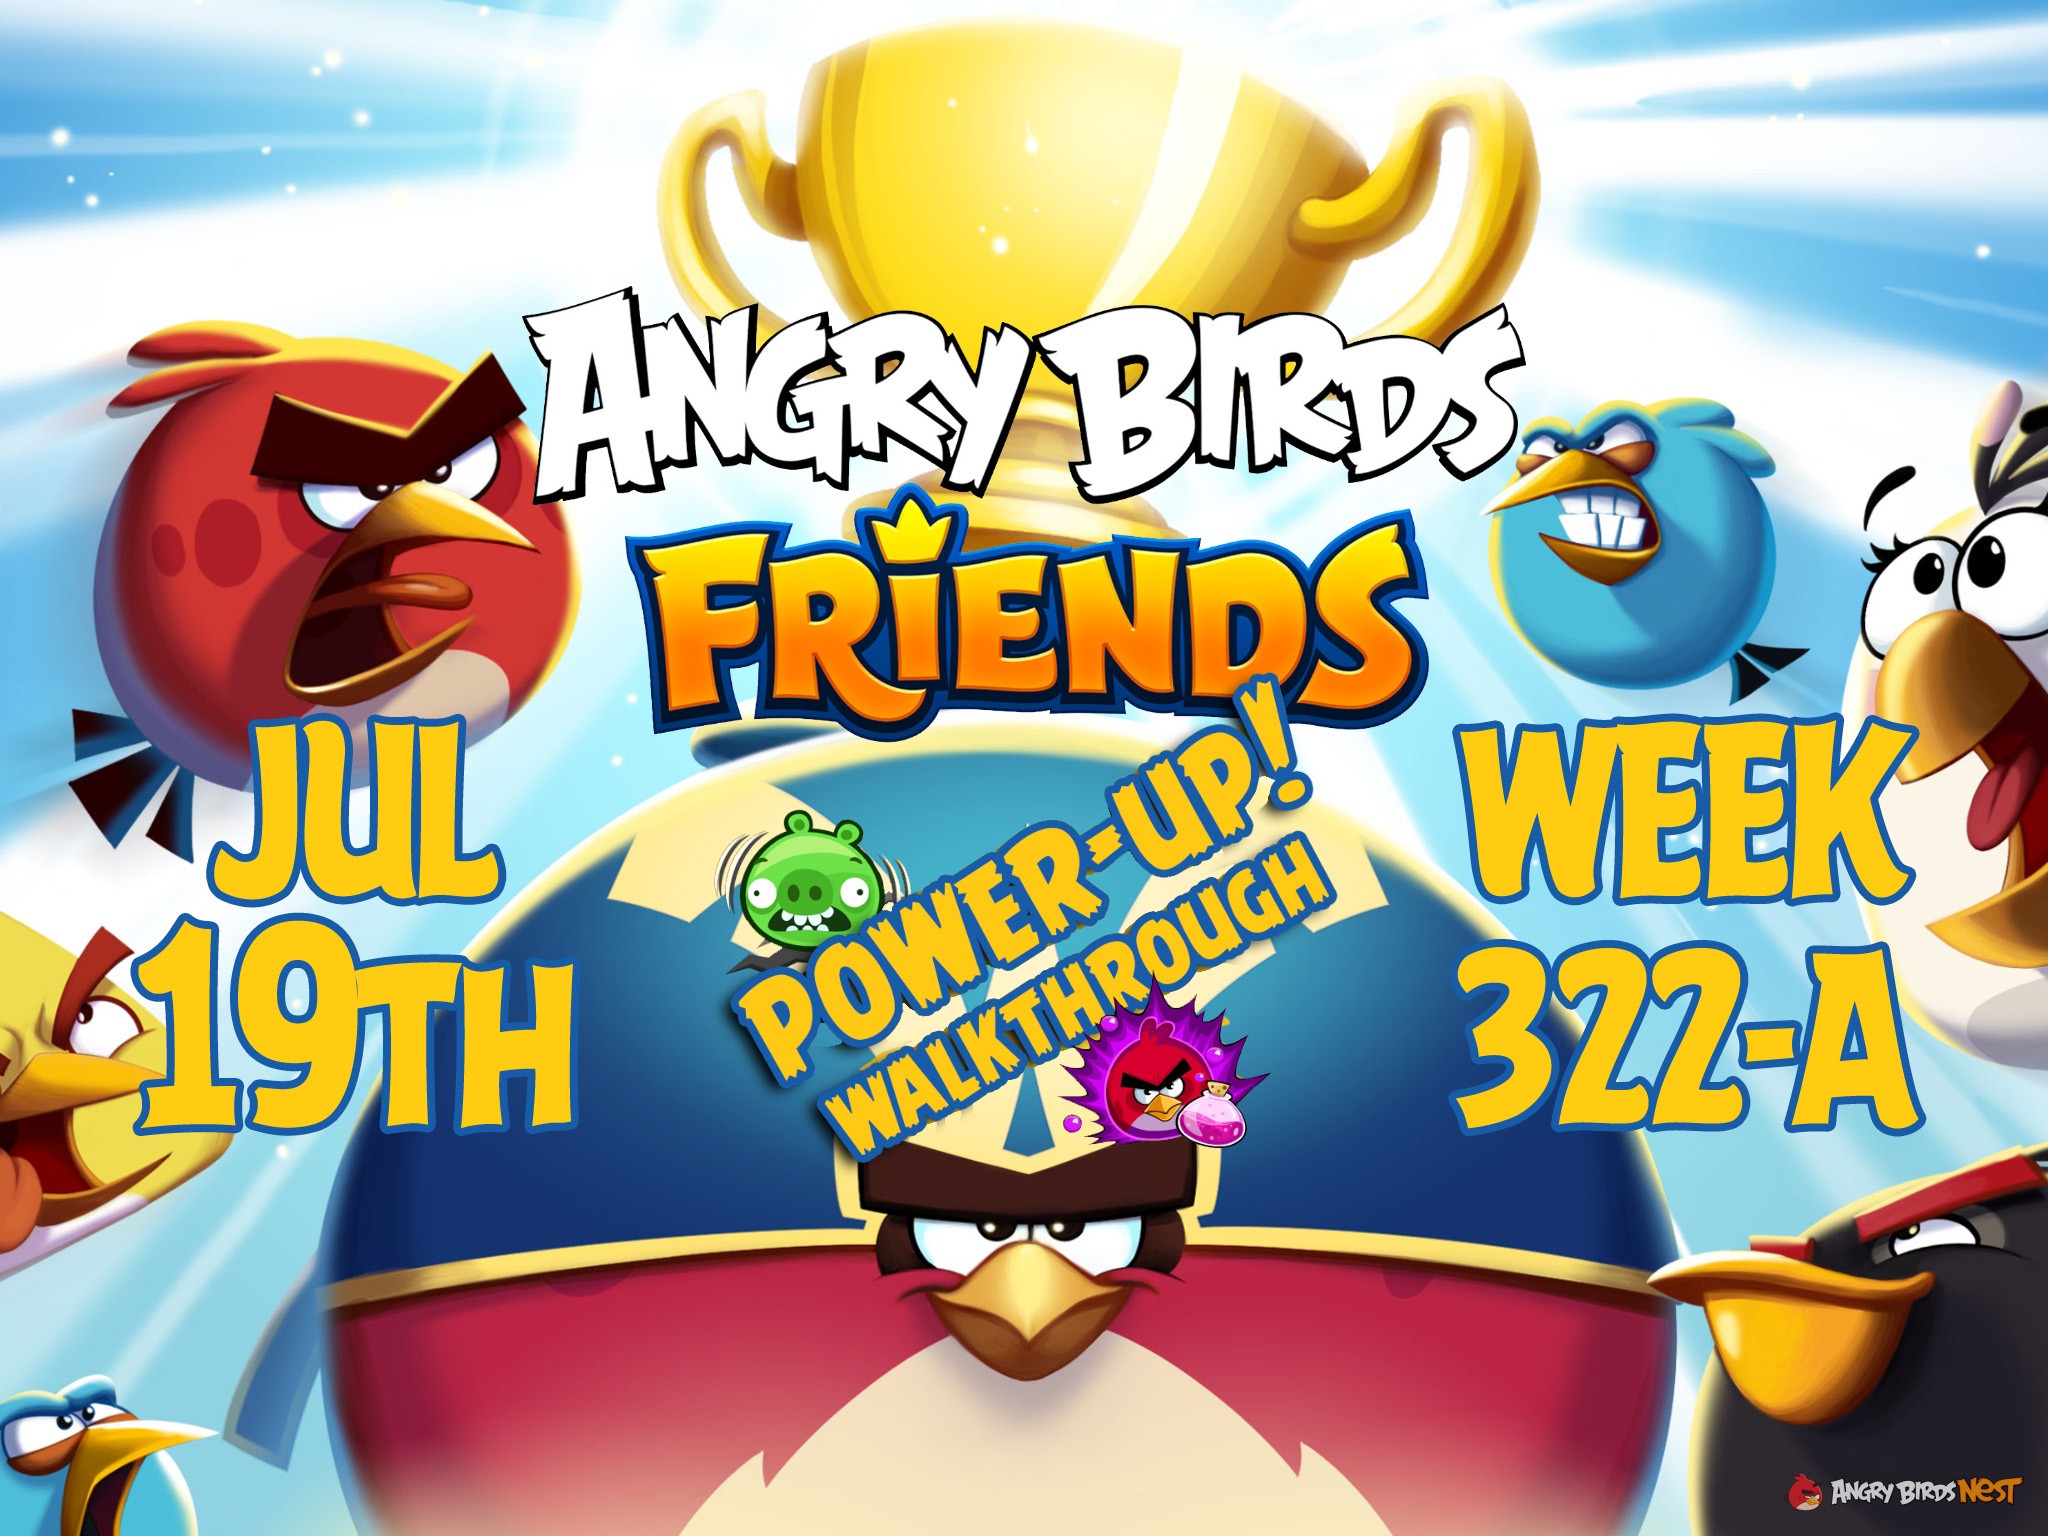 Angry-Birds-Friends-Tournament-Week-322-A-Feature-Image-PU